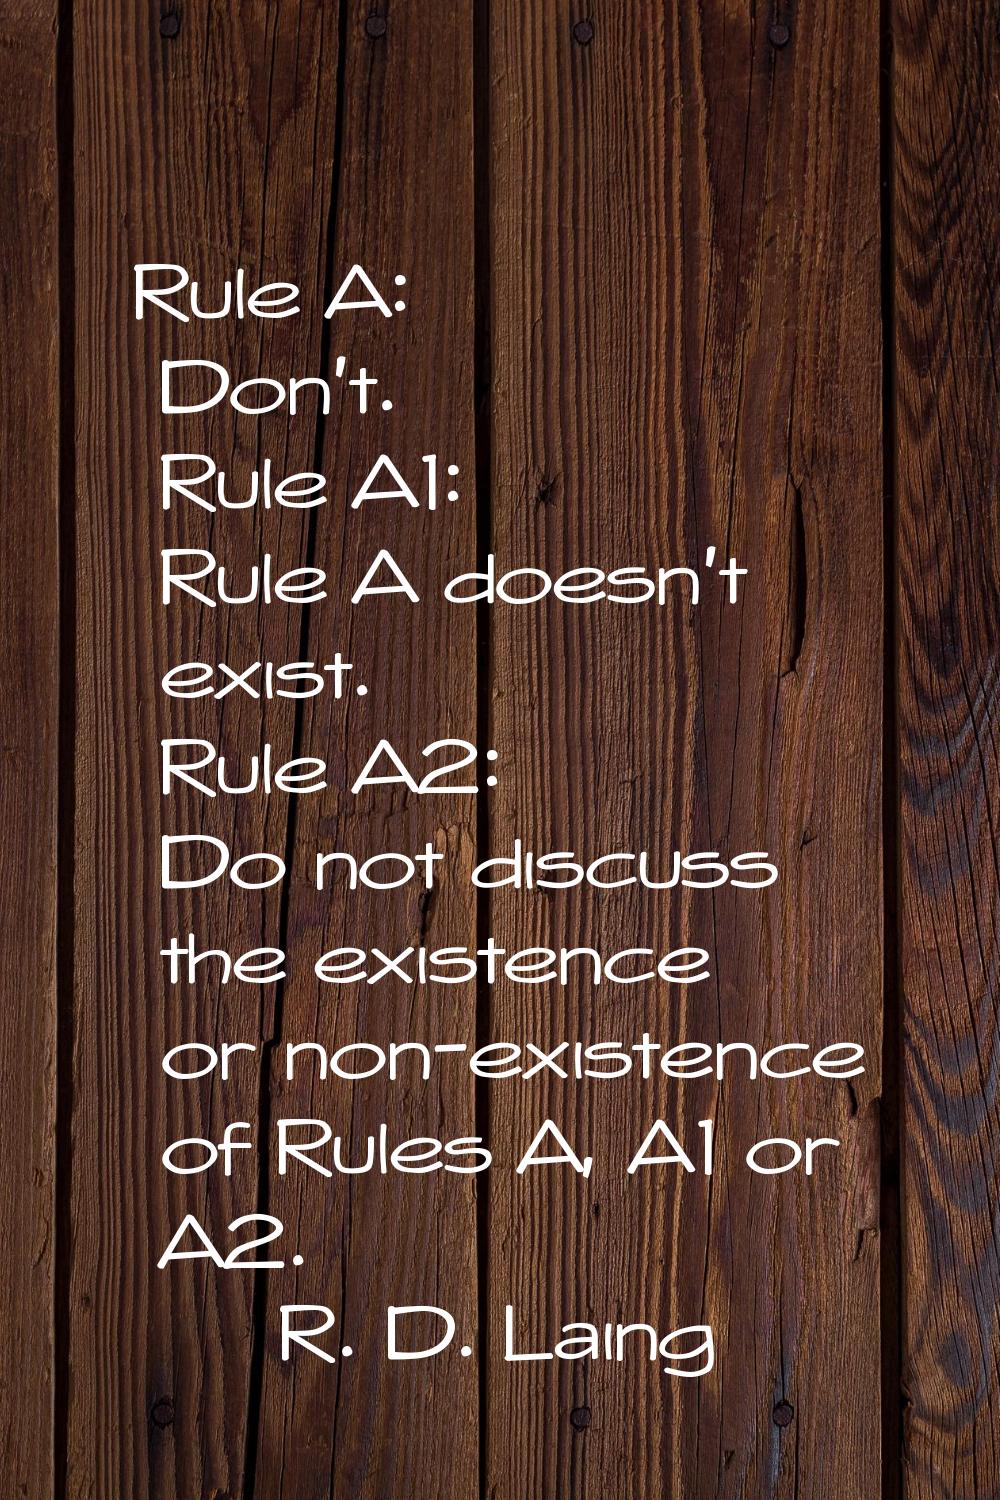 Rule A: Don't. Rule A1: Rule A doesn't exist. Rule A2: Do not discuss the existence or non-existenc